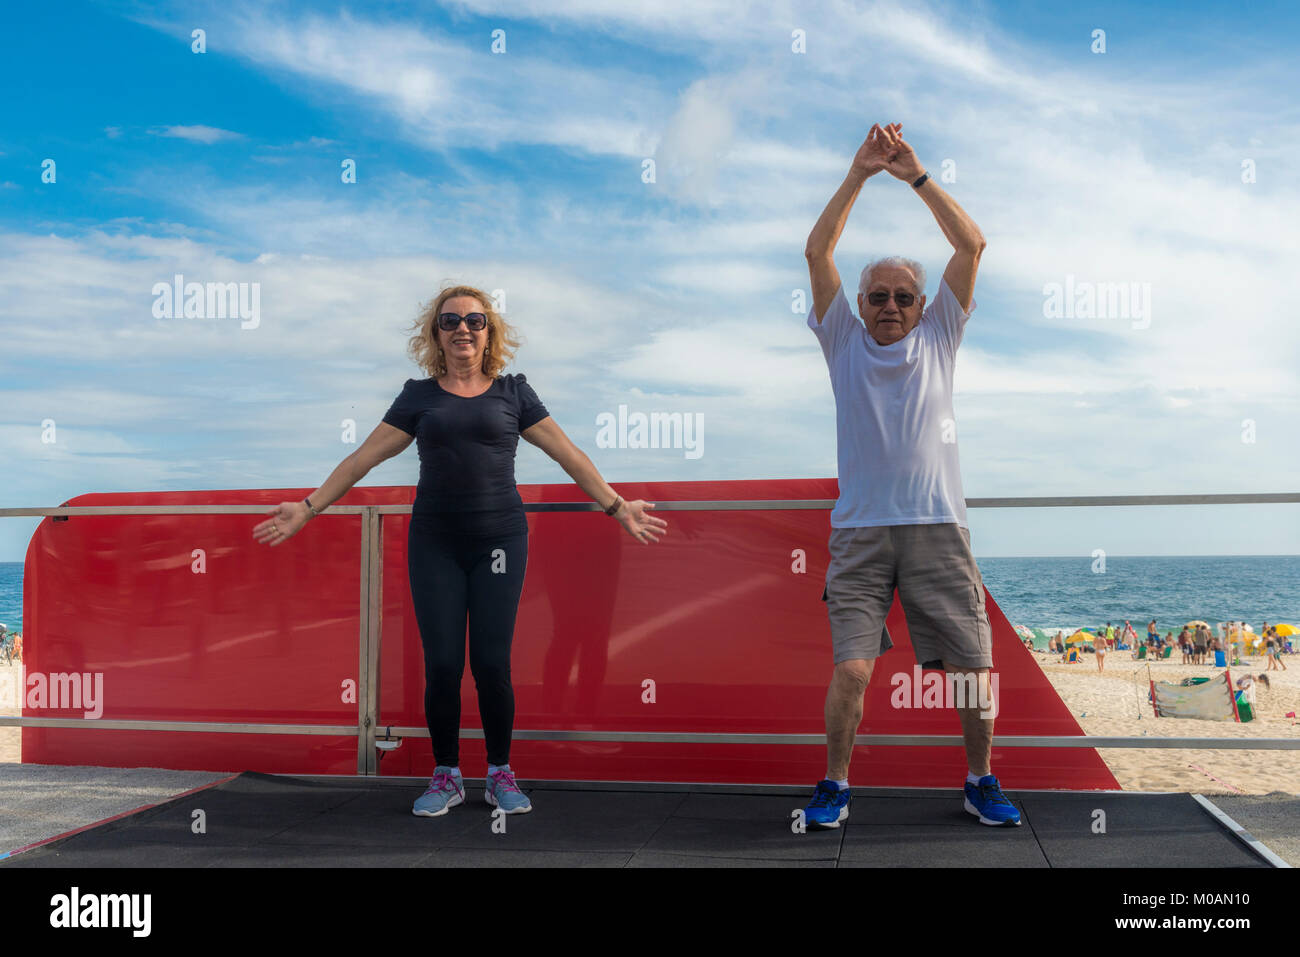 Model Released: Mature man and woman perform jumping jacks at outdoors exercise area near a beach - boot camp Stock Photo